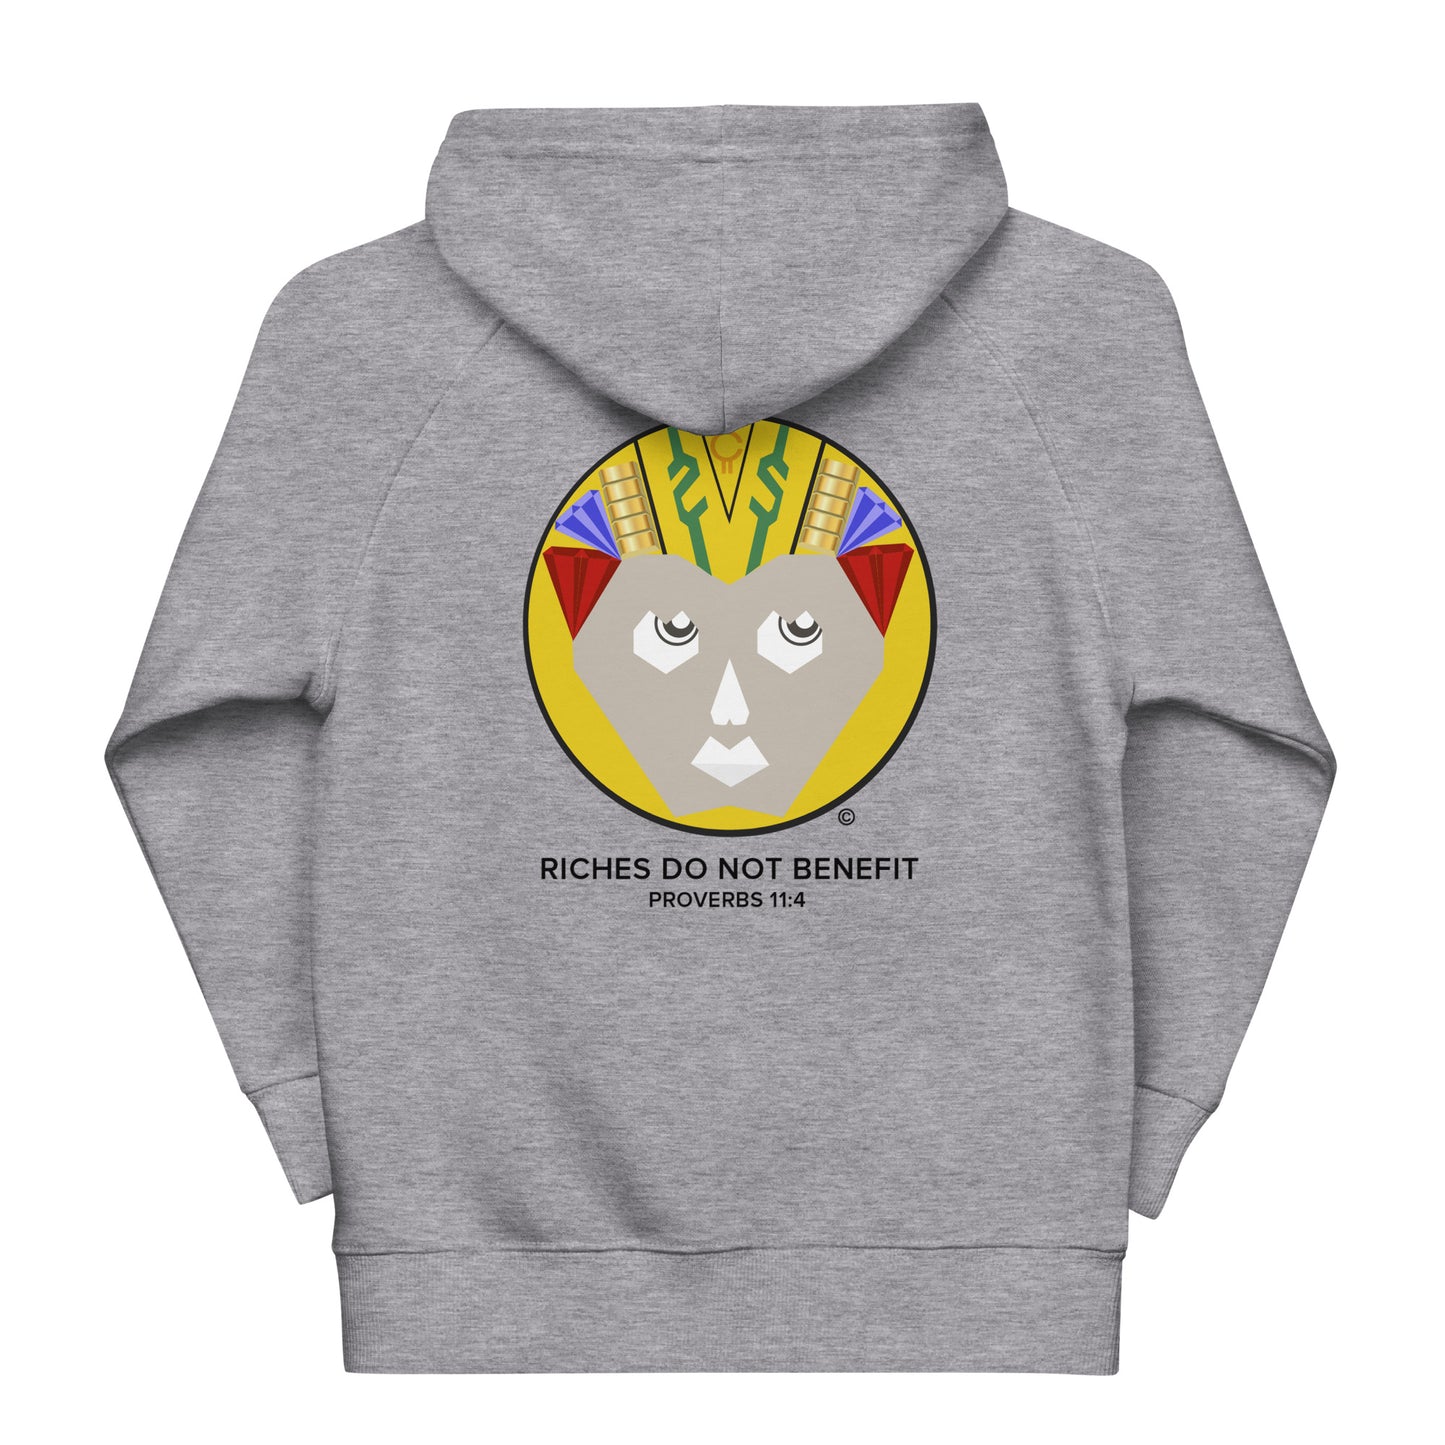 Riches Do Not Benefit Kids Eco Hoodie